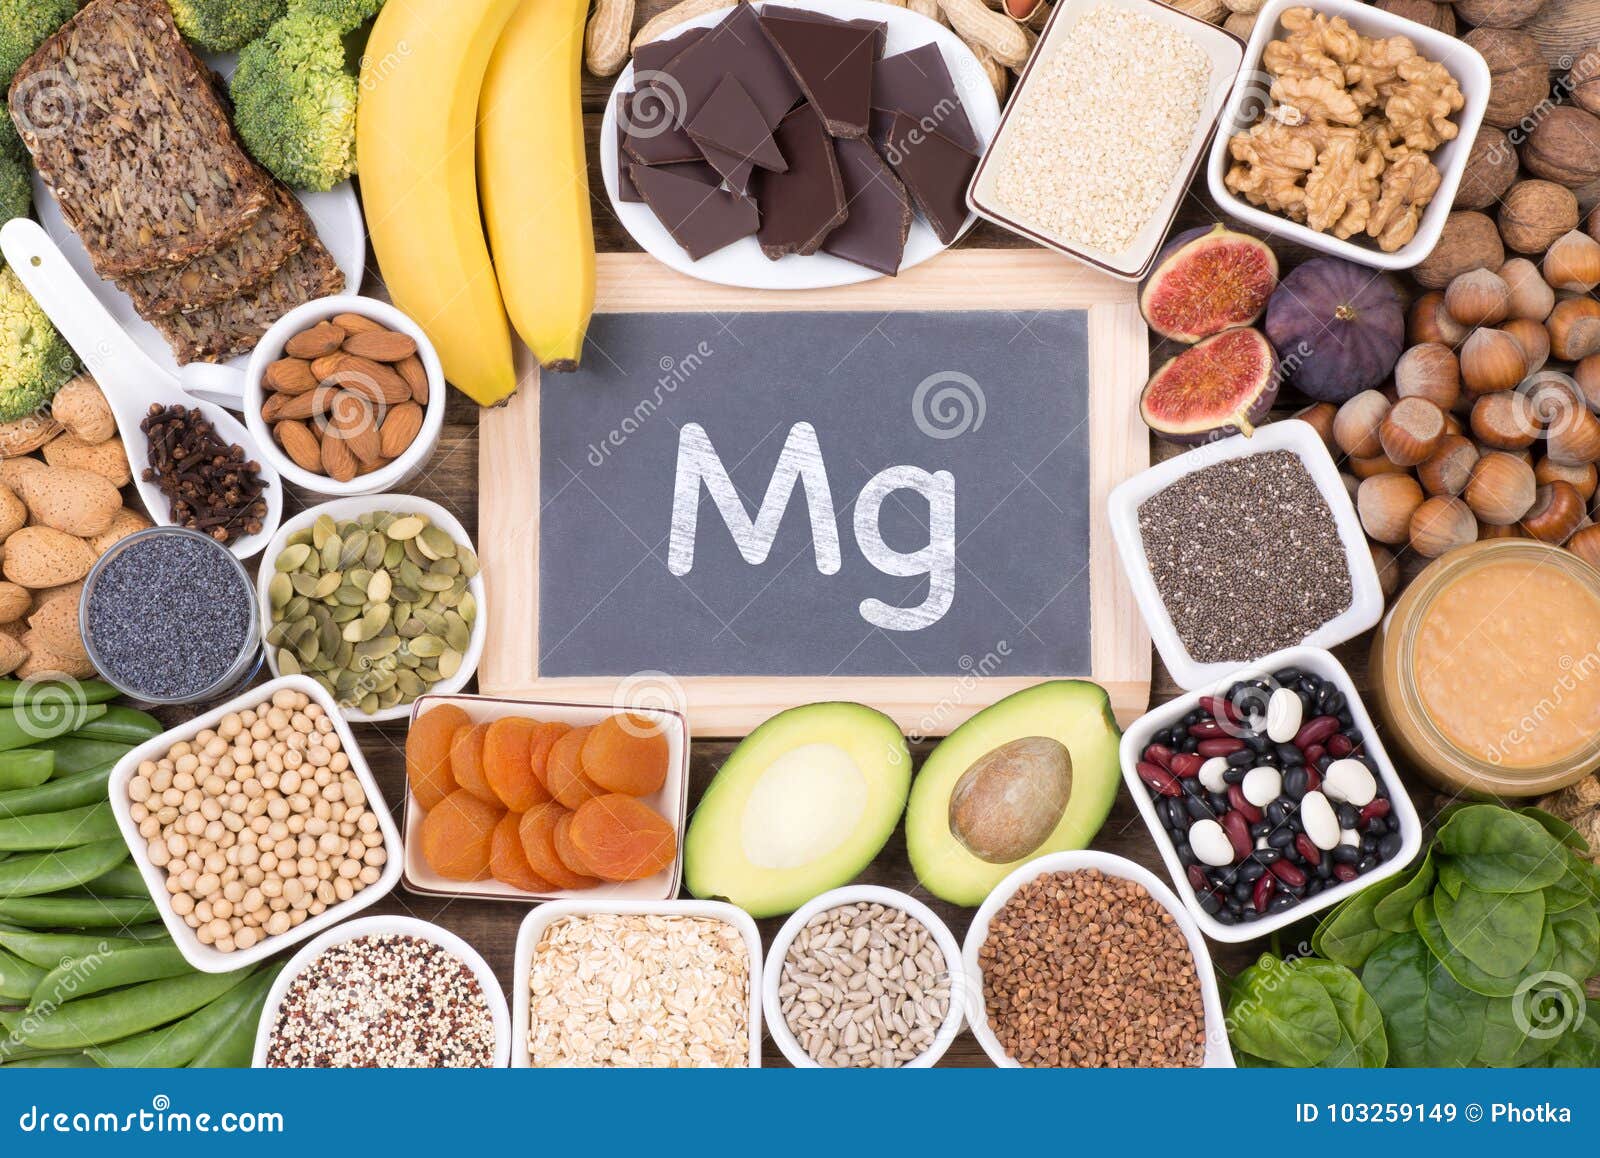 magnesium food sources, top view on wooden background